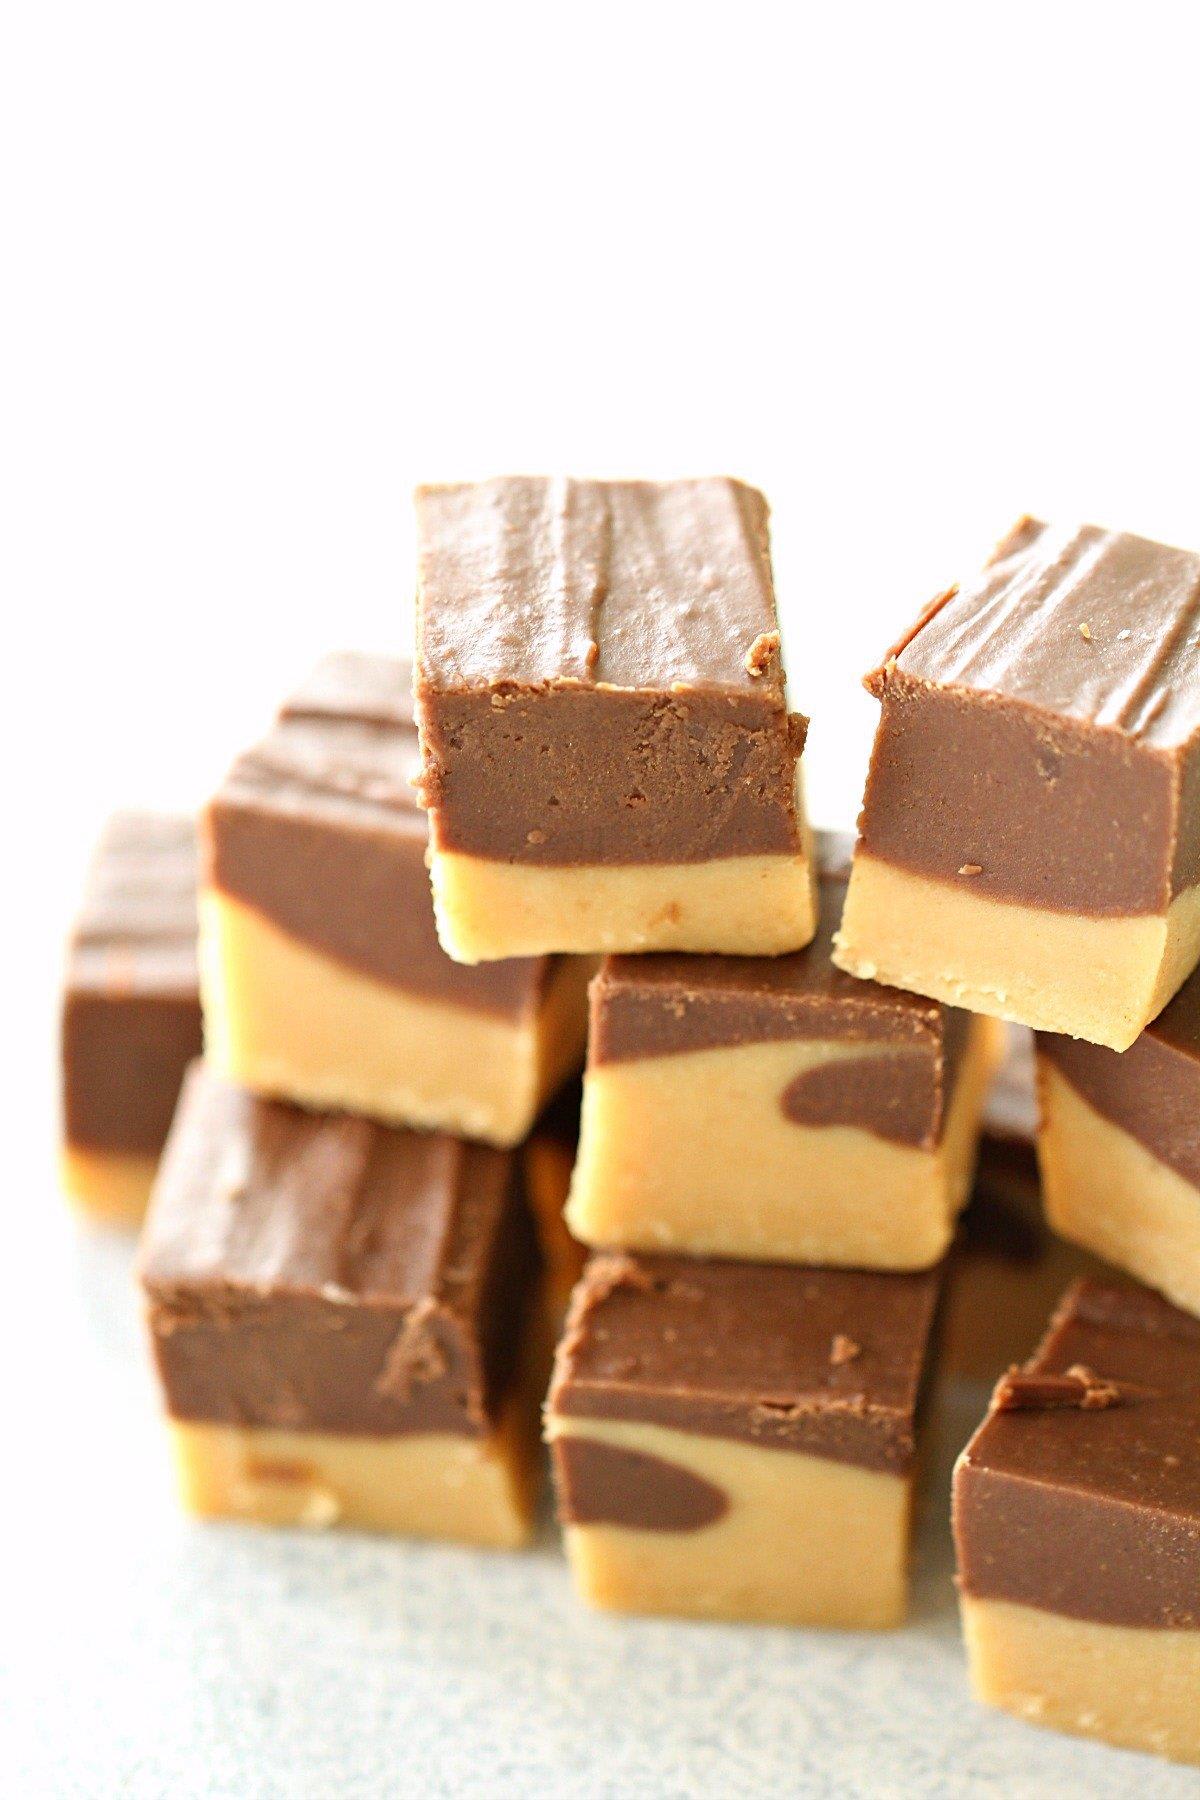 Chocolate Peanut Butter Fudge - Chocolate Chocolate and More!